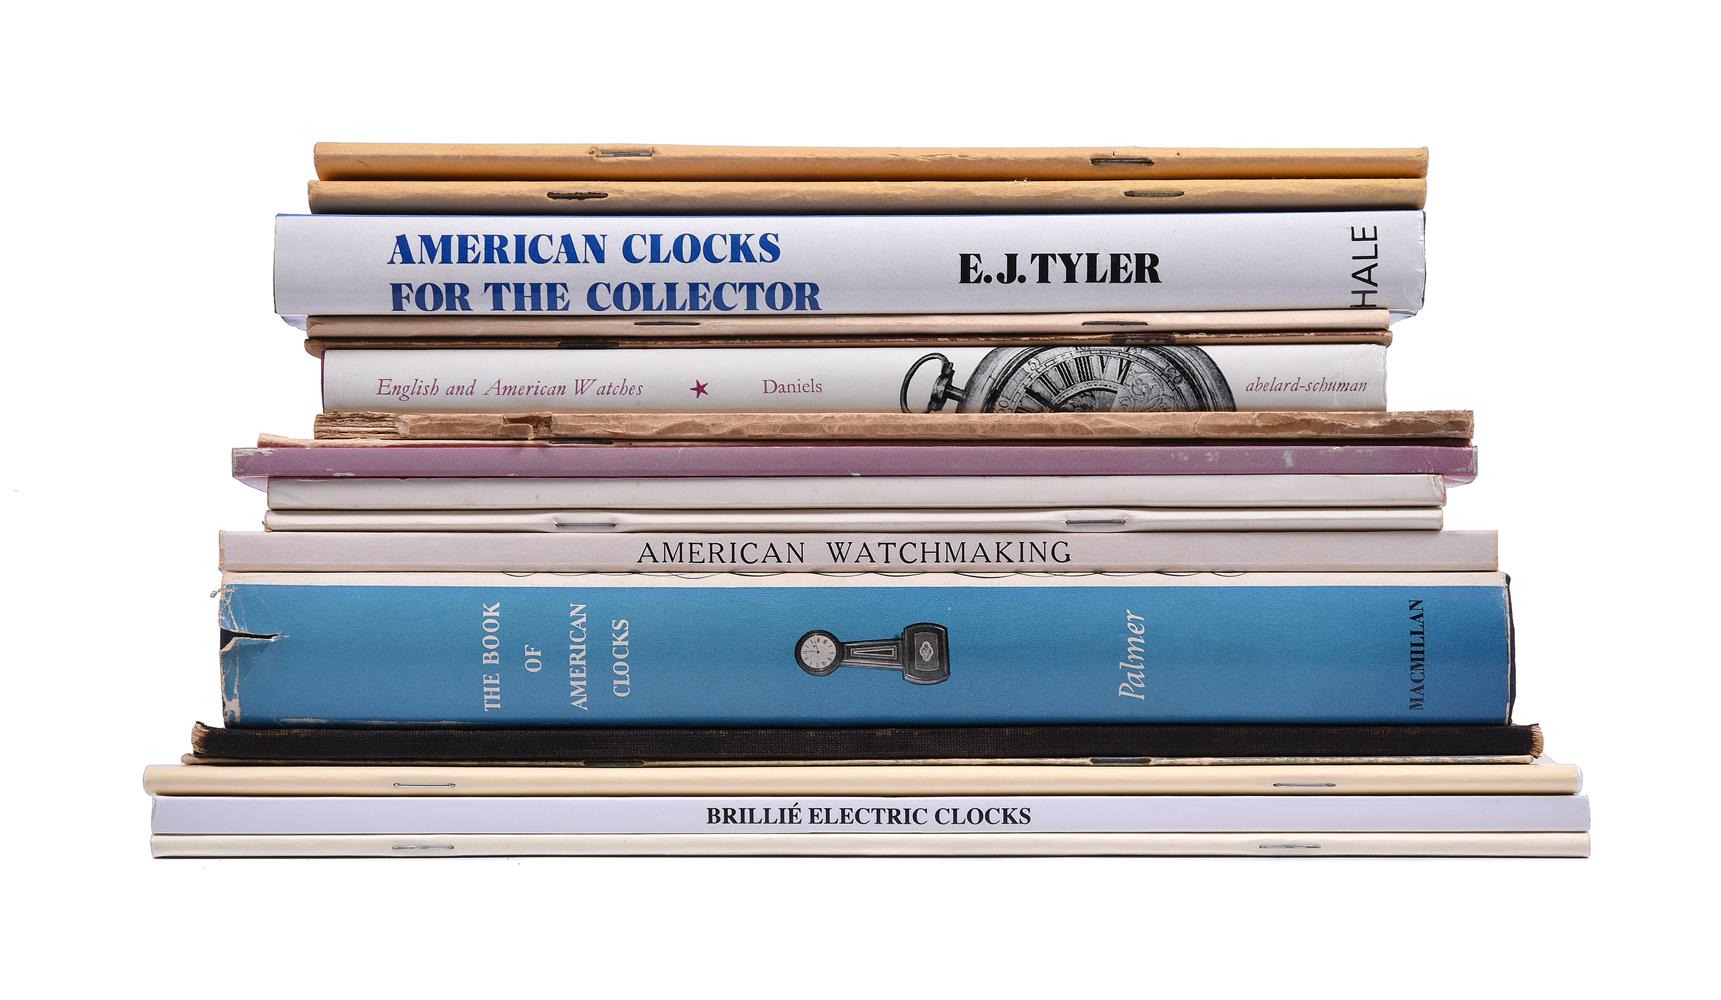 AMERICAN AND ELECTRICAL HOROLOGY, Eleven publications: